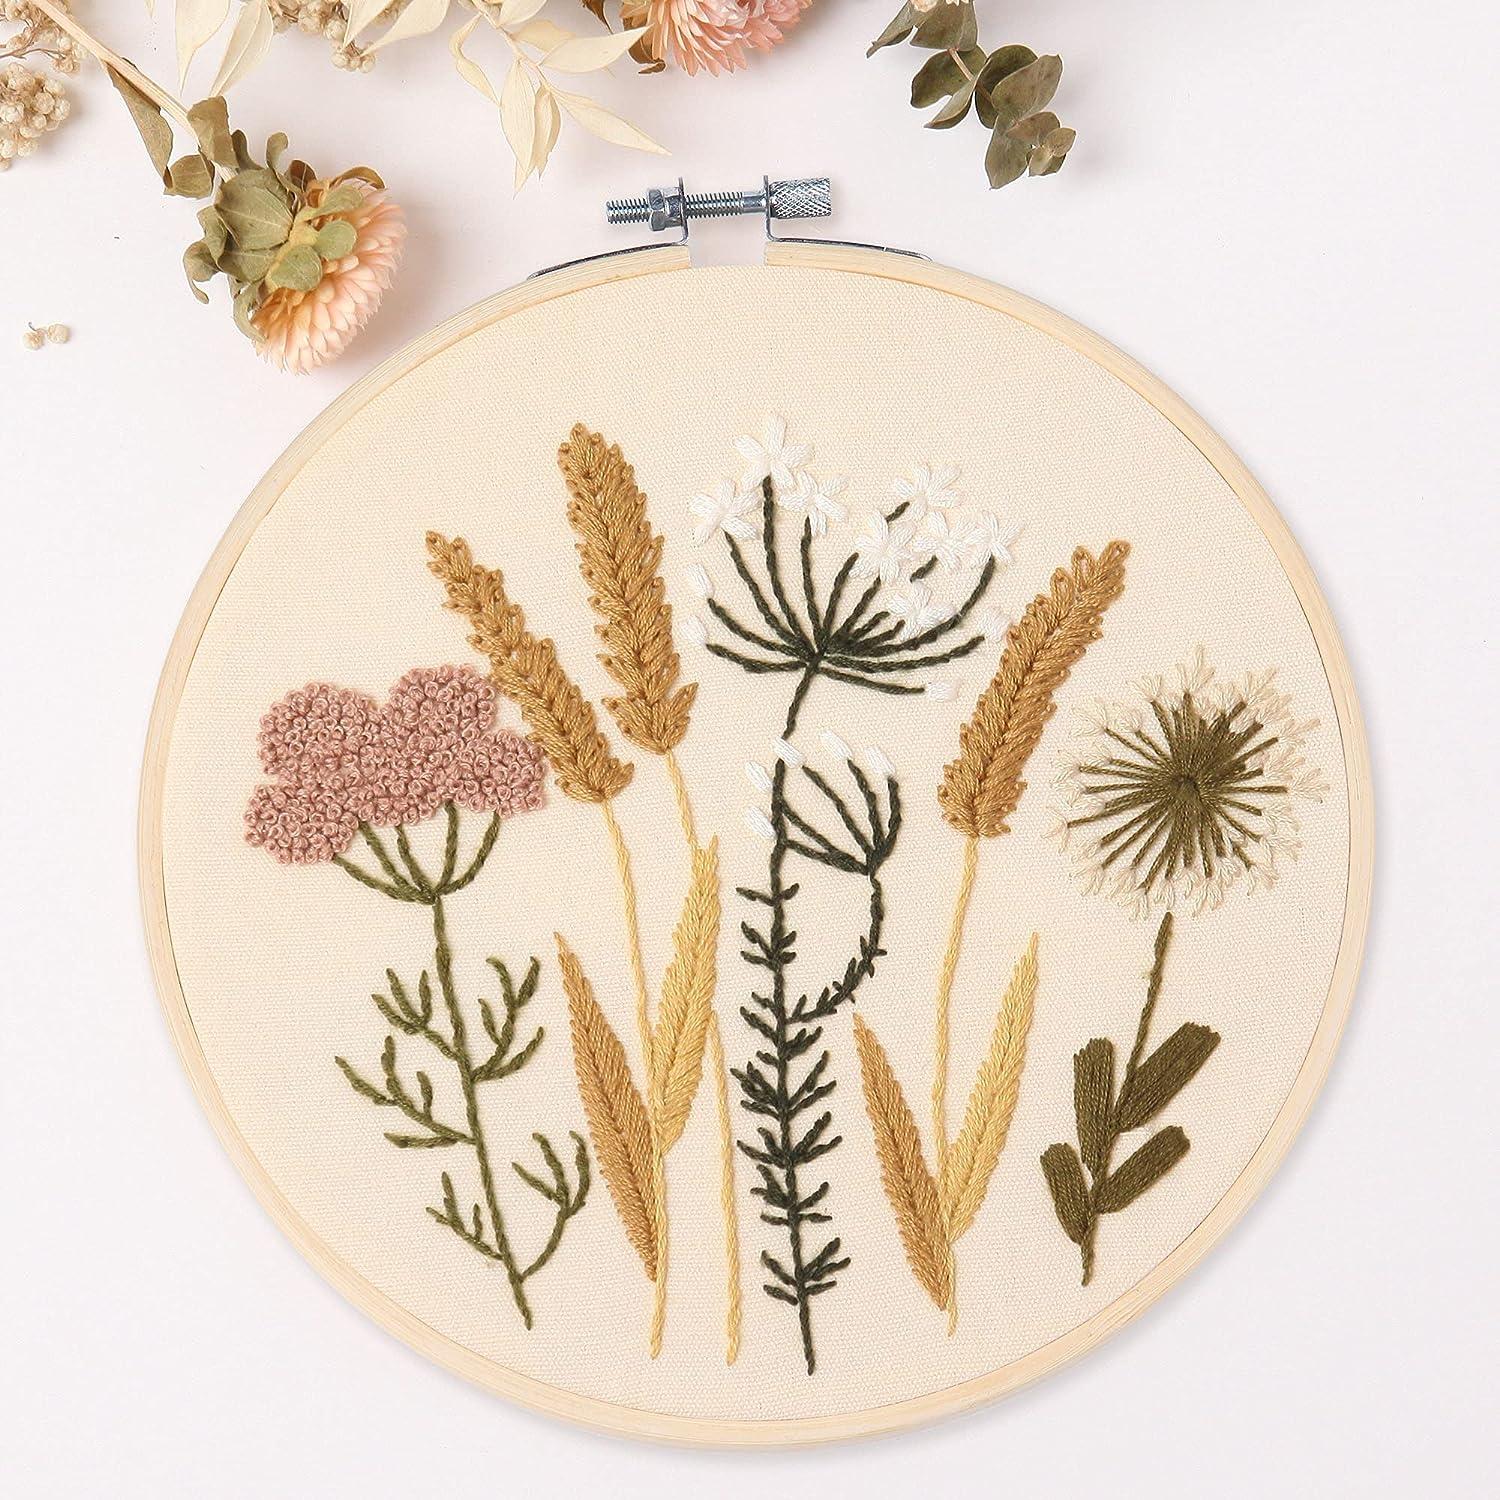 Hand Embroidery : Floral Hoop Art Embroidery Design for Beginners